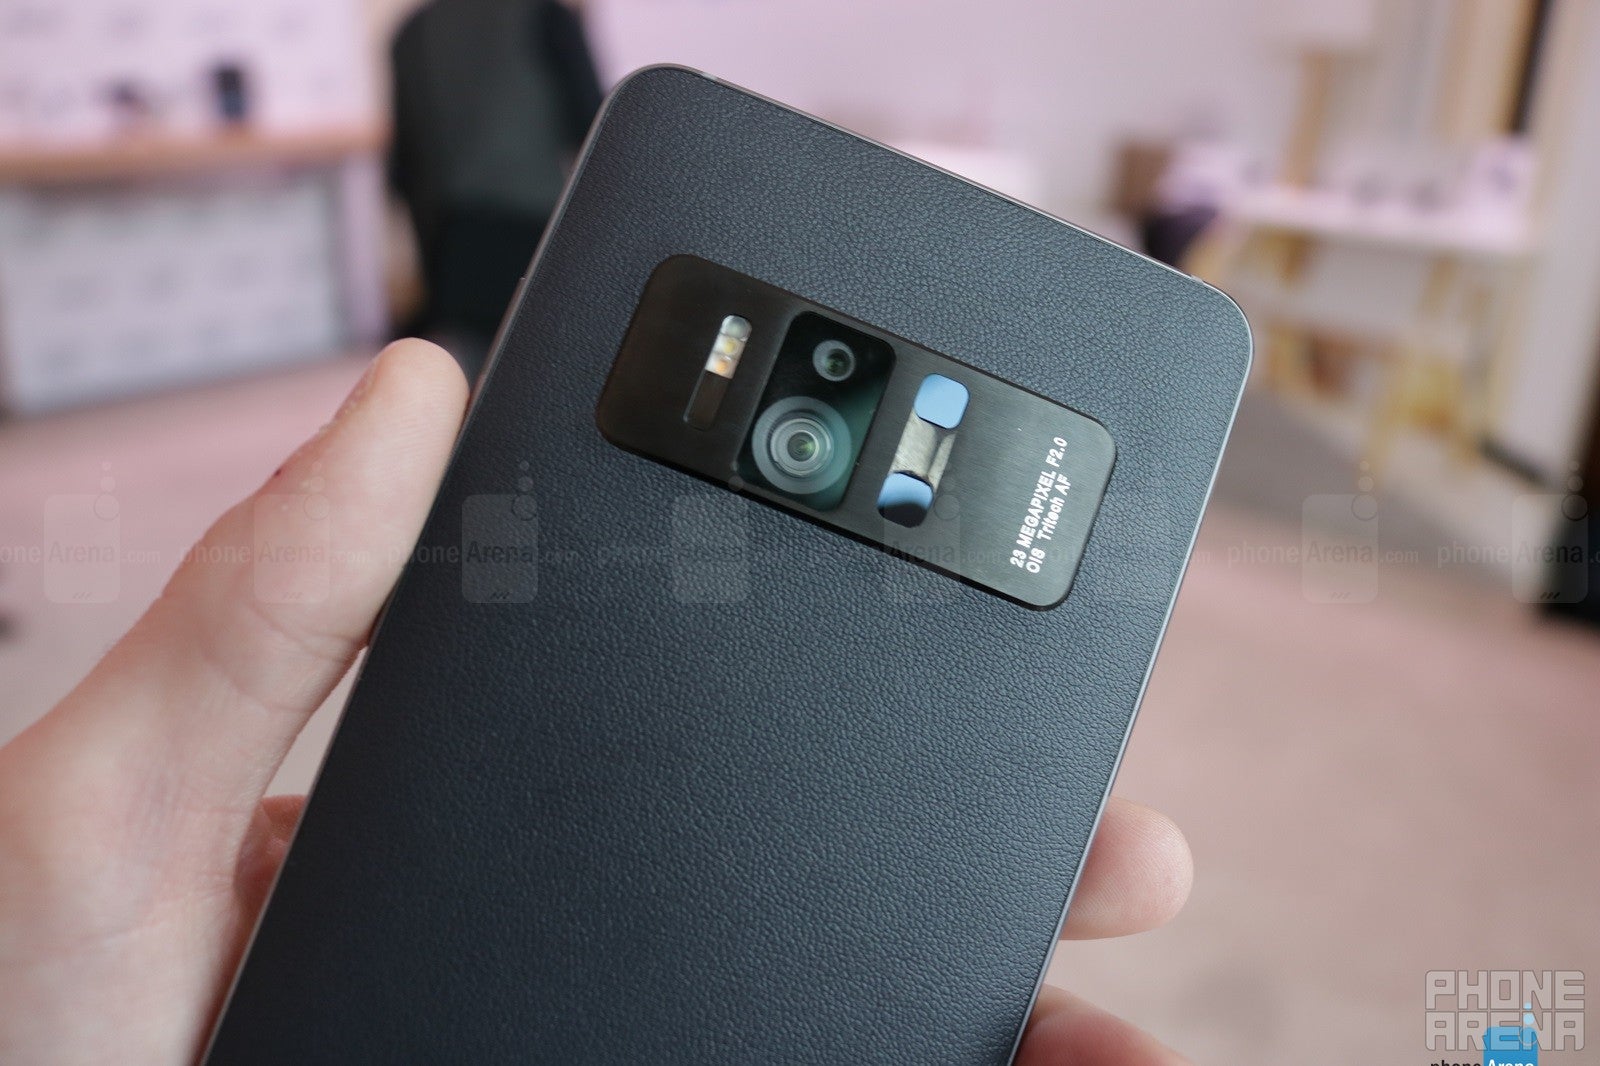 Hands-on look at the Asus ZenFone AR - augmented and virtual reality combined in one single handset